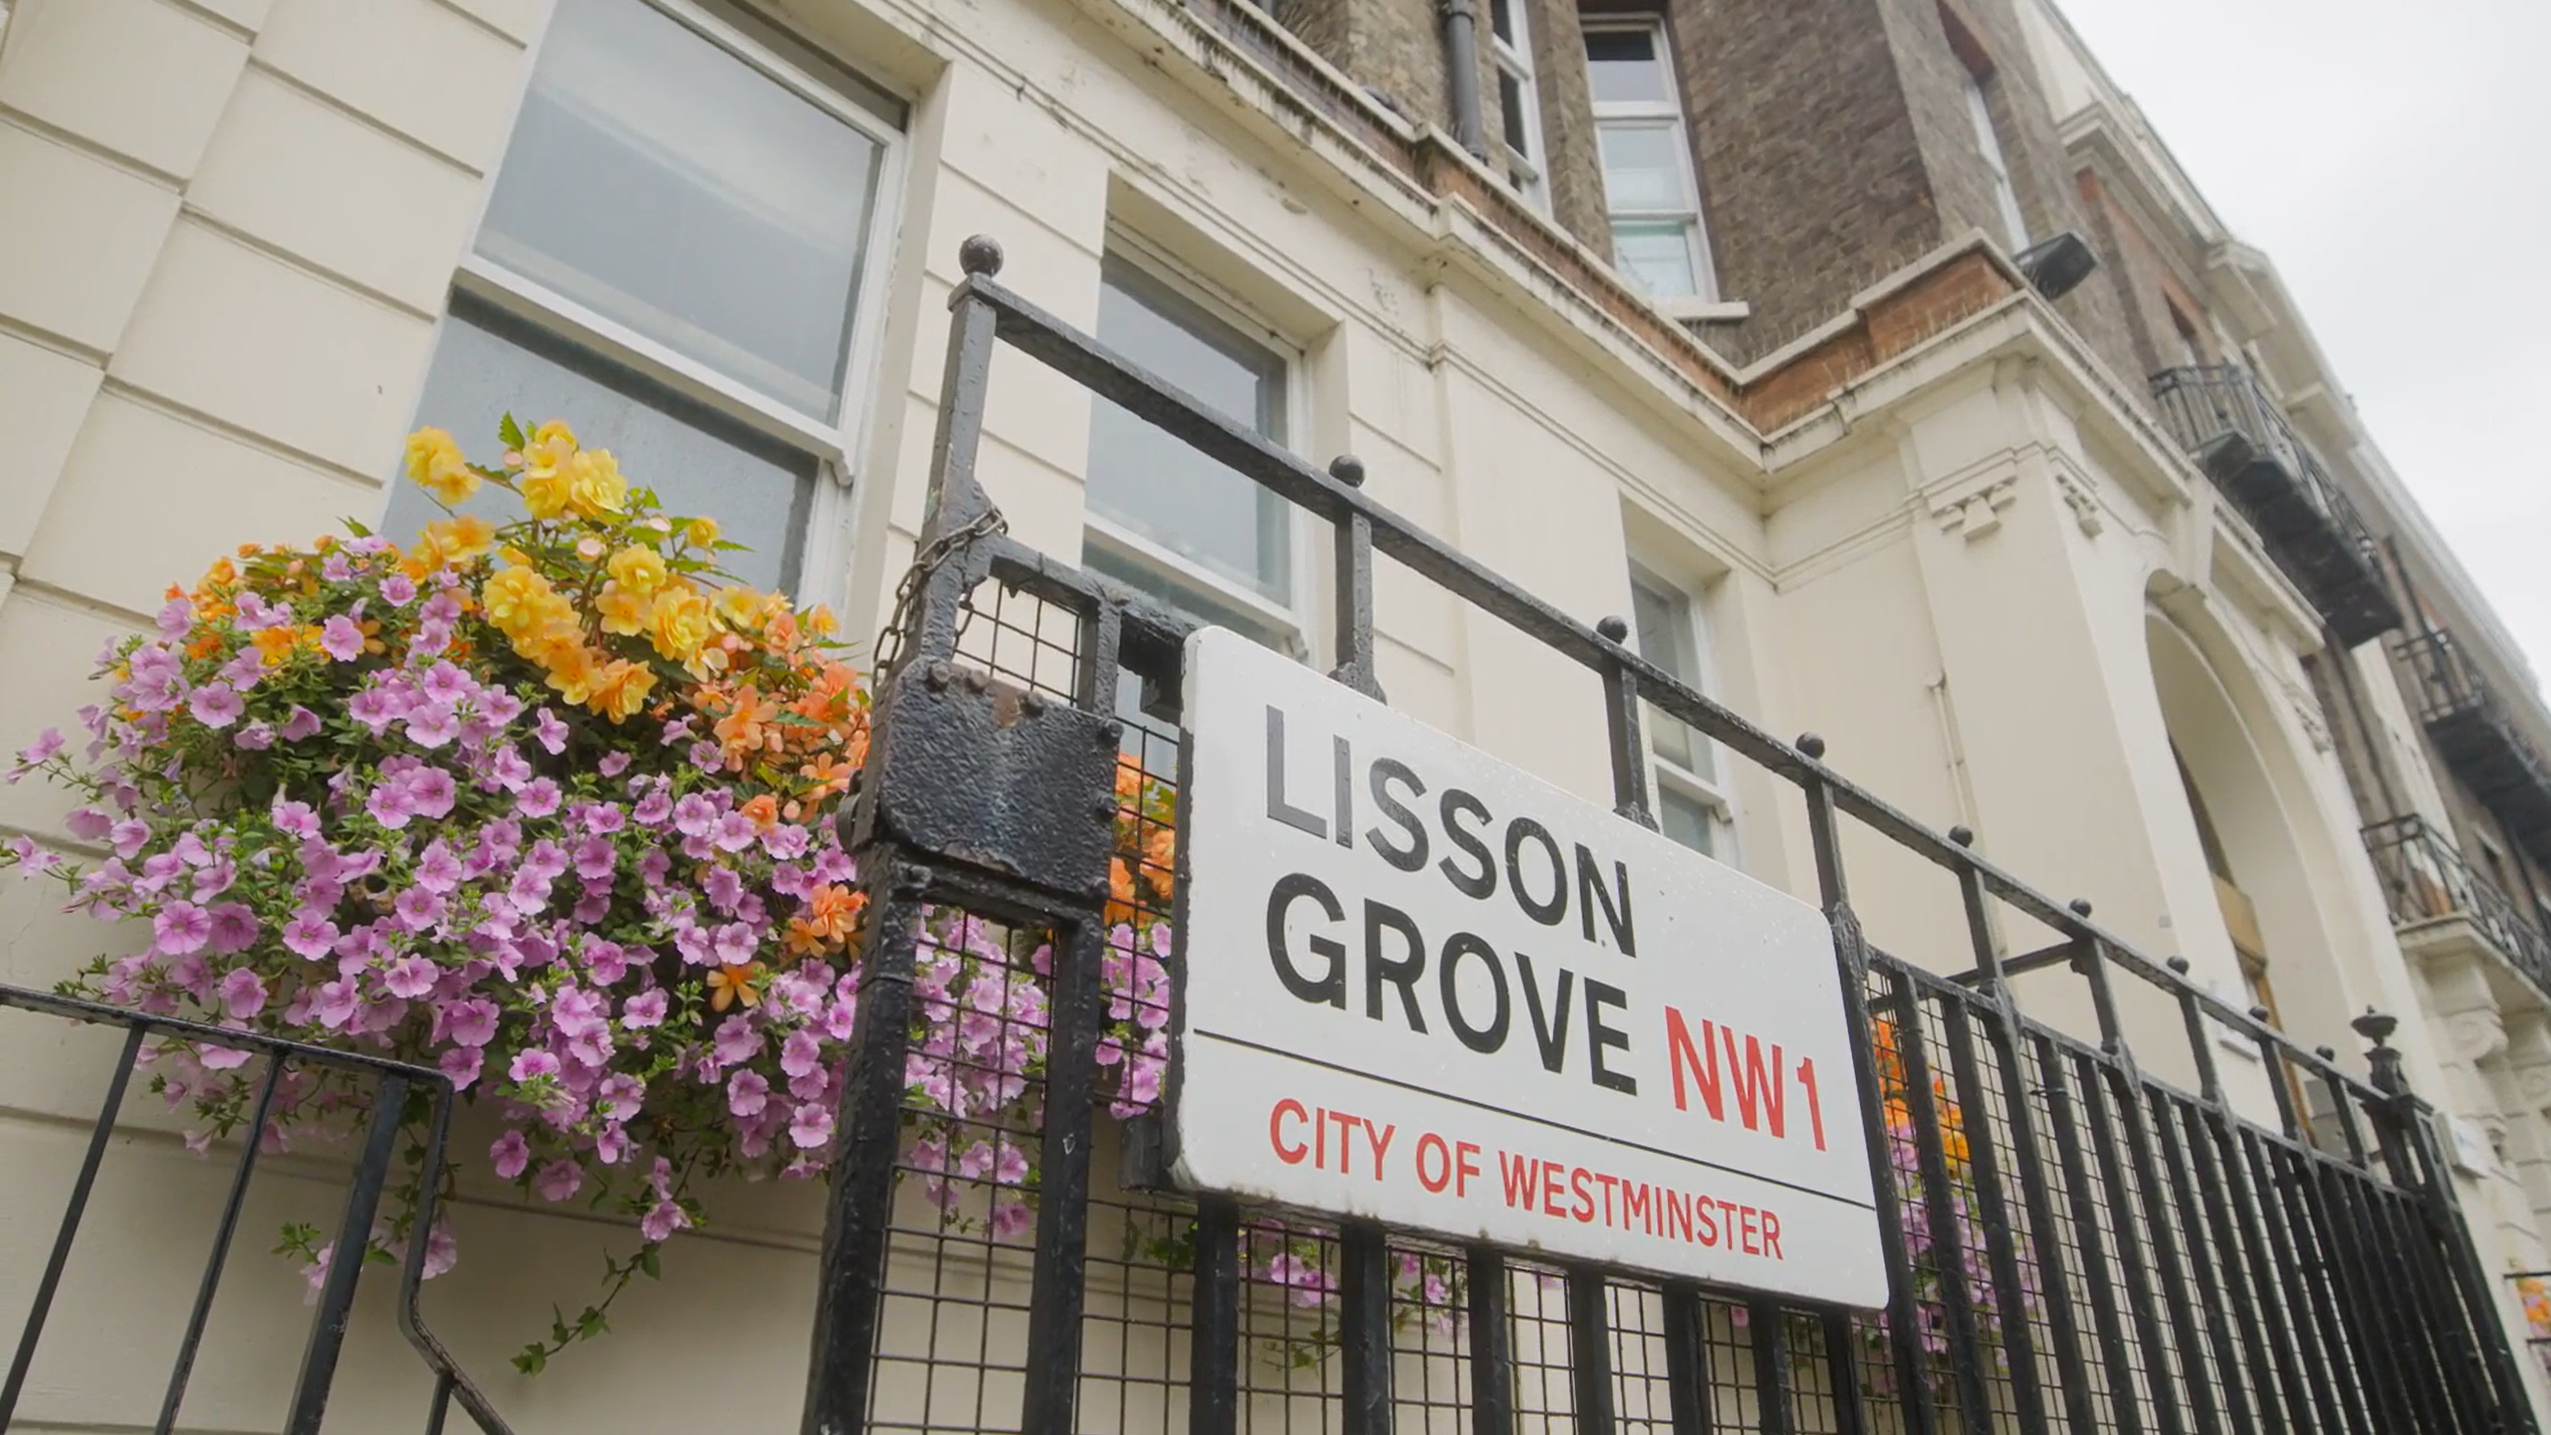 Sign of Lisson Grove